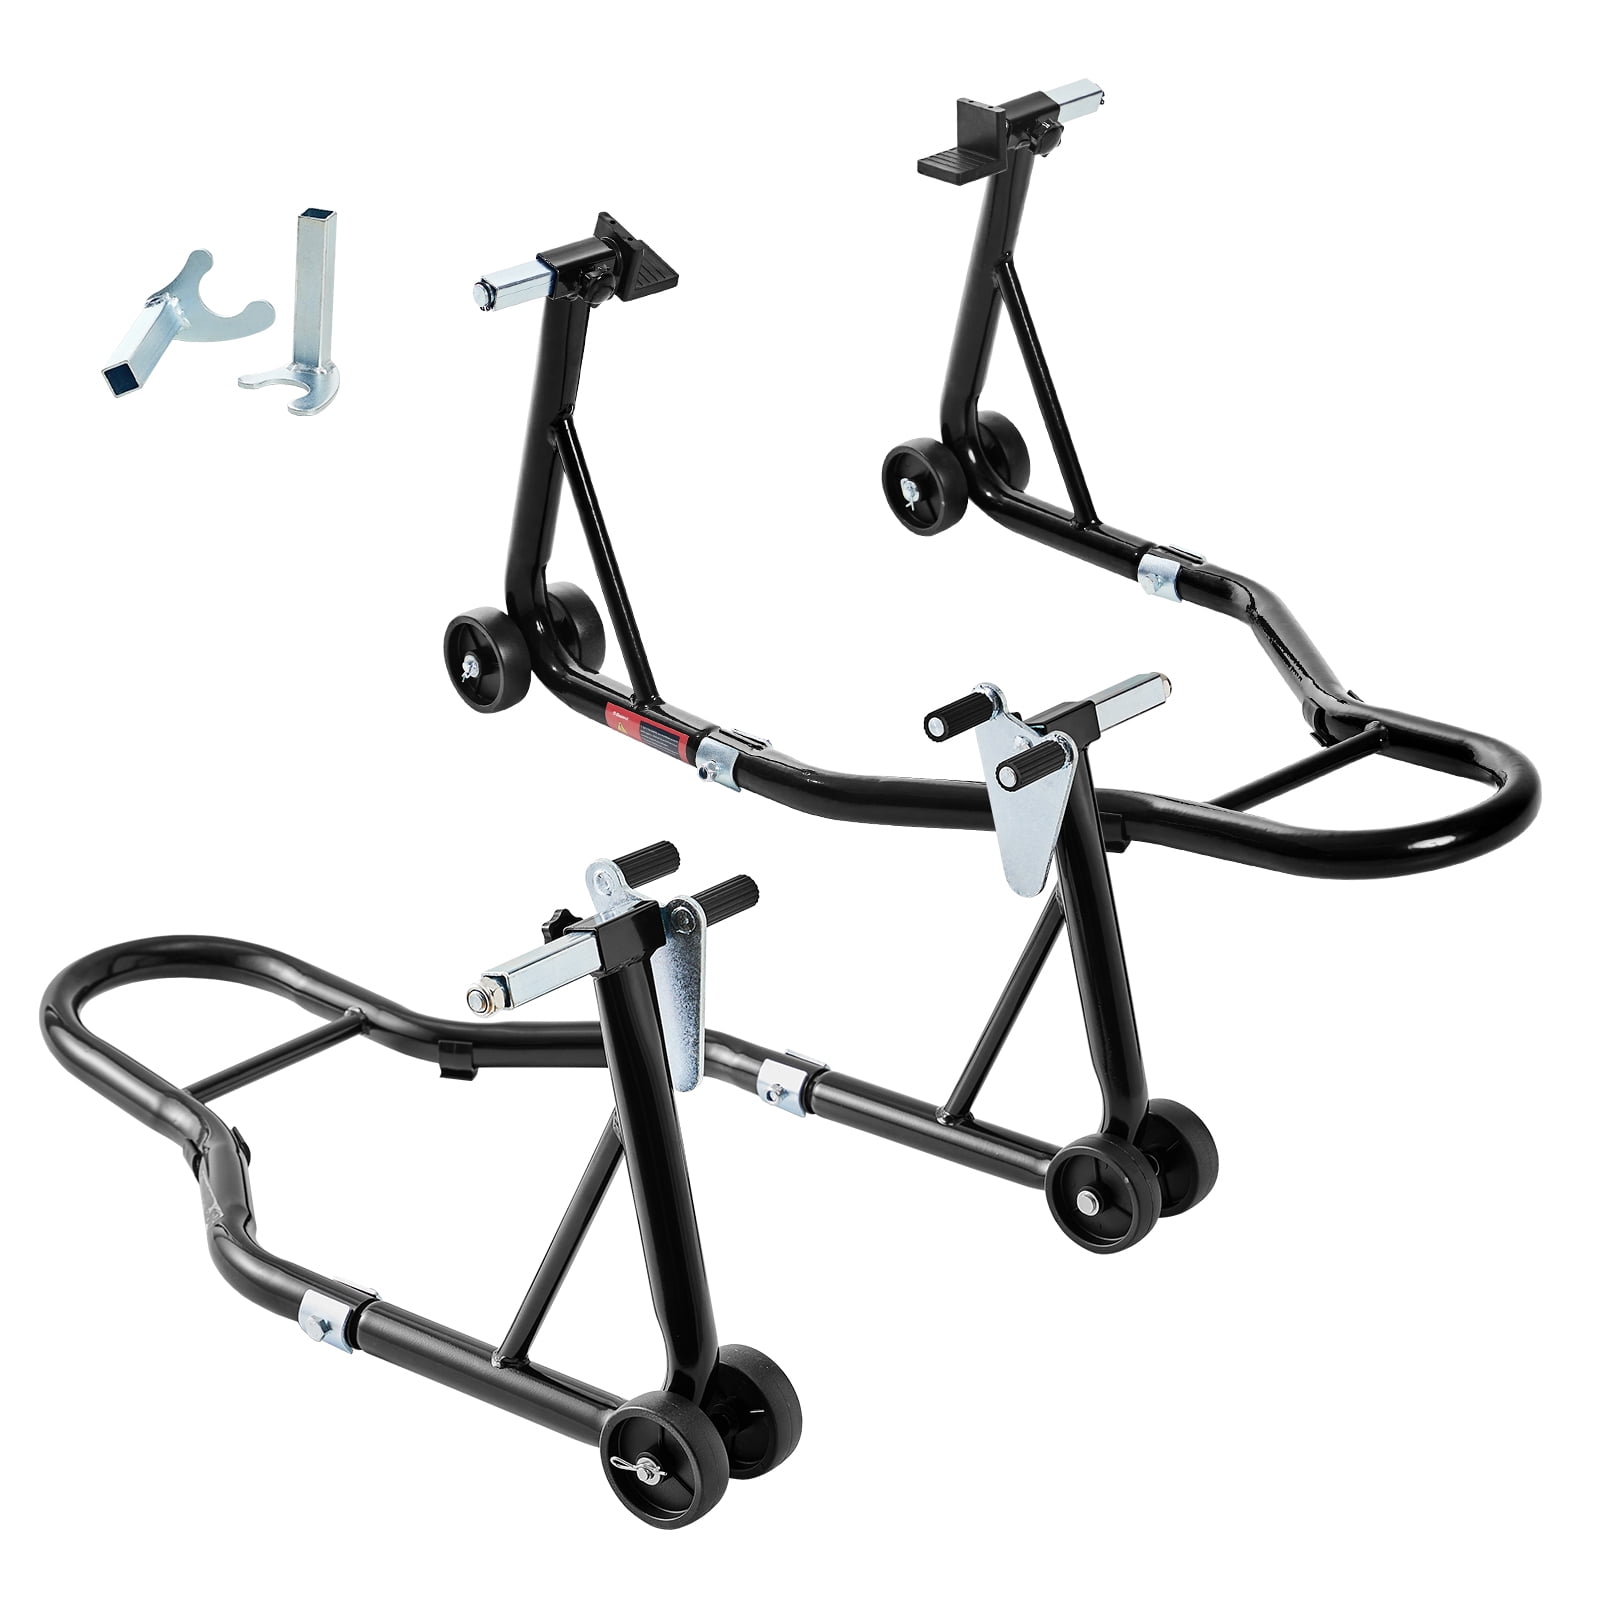 Donext Motorcycle Stand 850LB Sport Bike Front and Rear Wheel Lift Swingarm  Paddock Stands Black, U+L